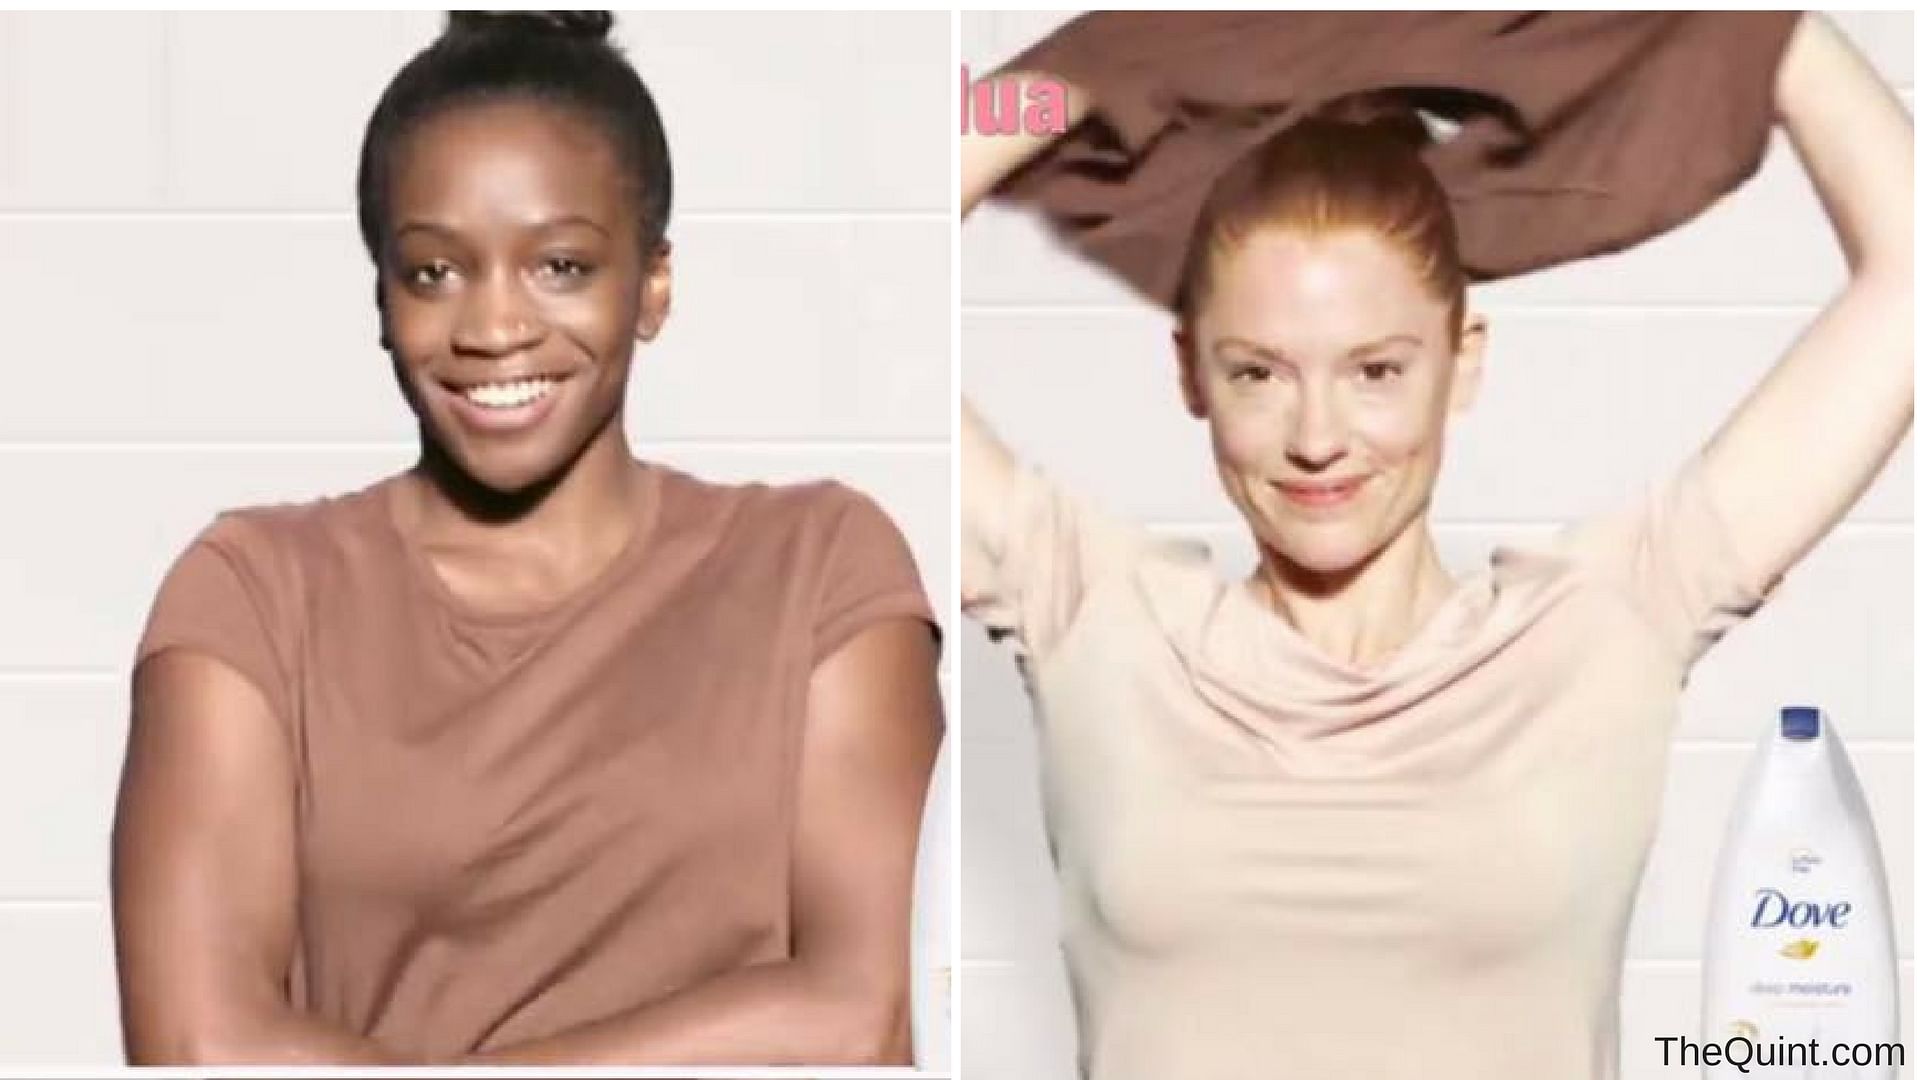 

Screen-grabs from the controversial Dove ad.